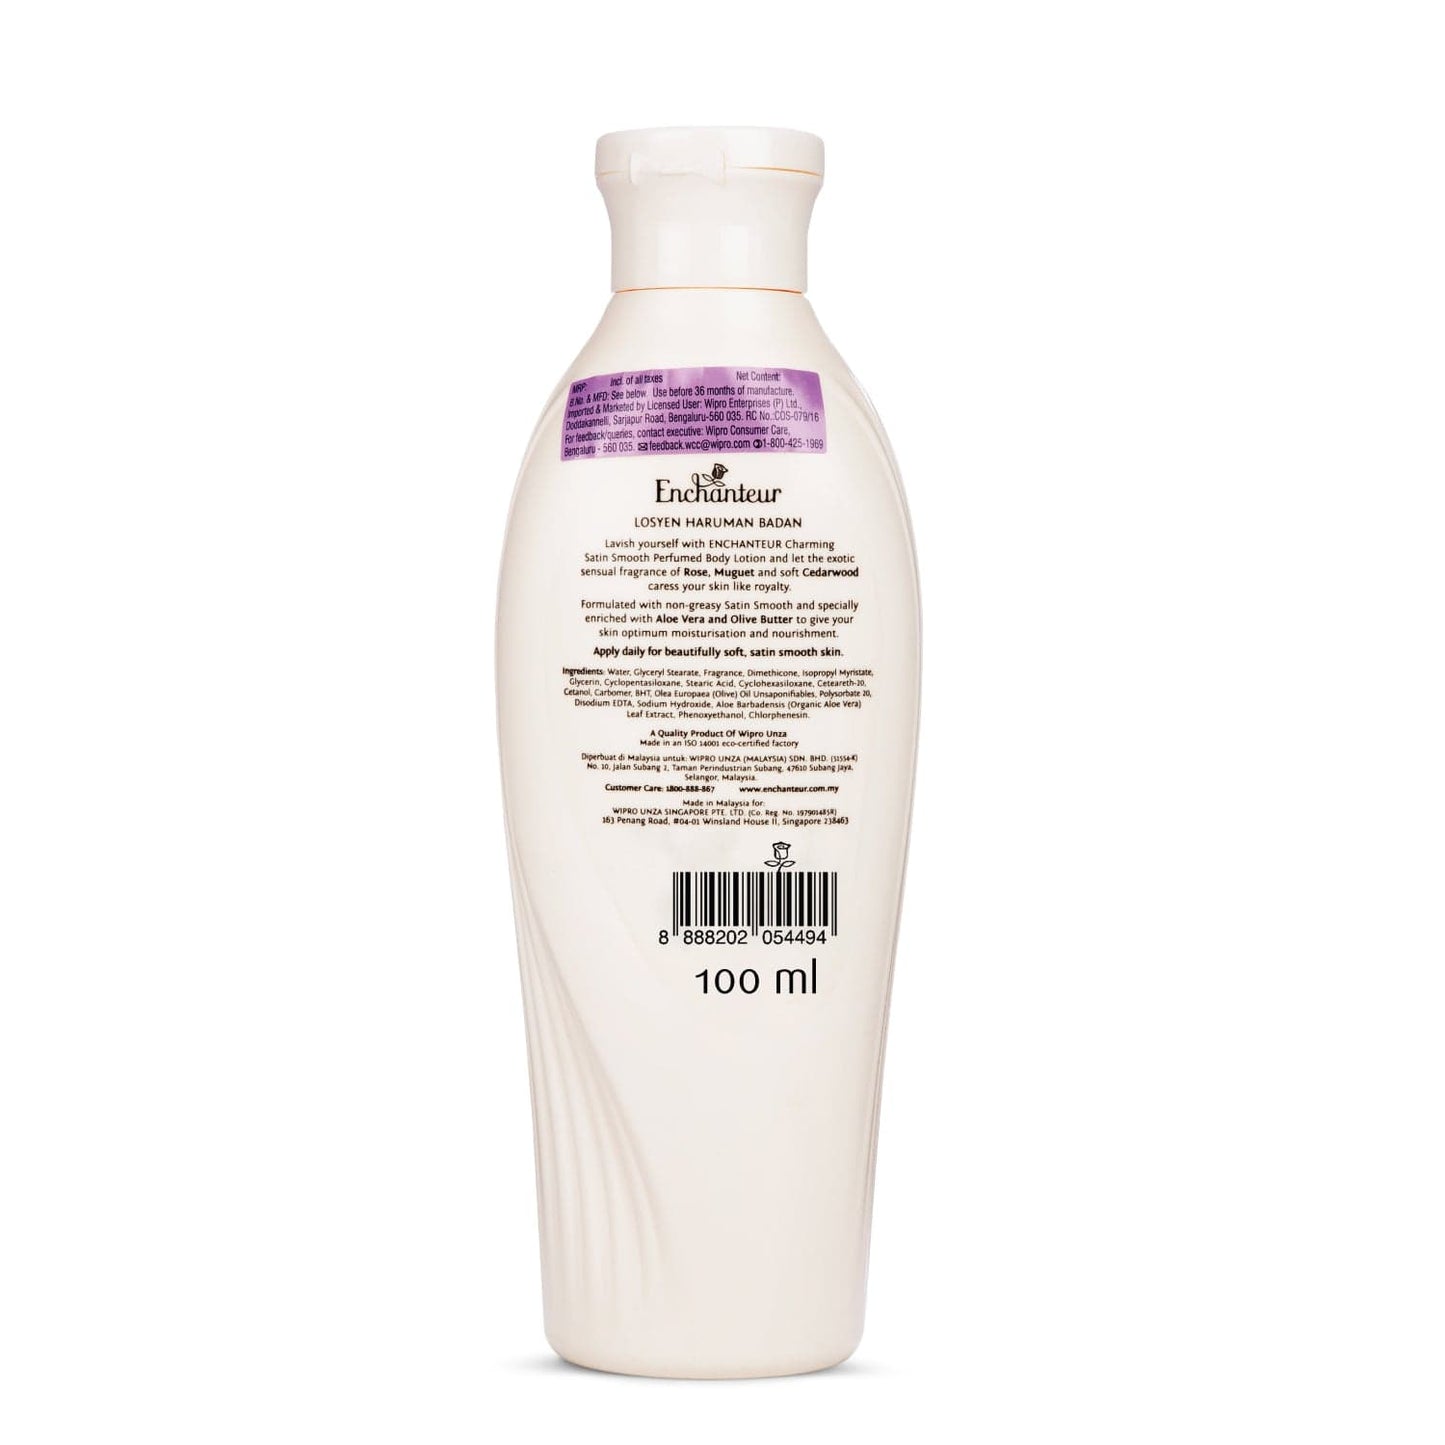 Enchanteur Charming Hand and Body Lotion